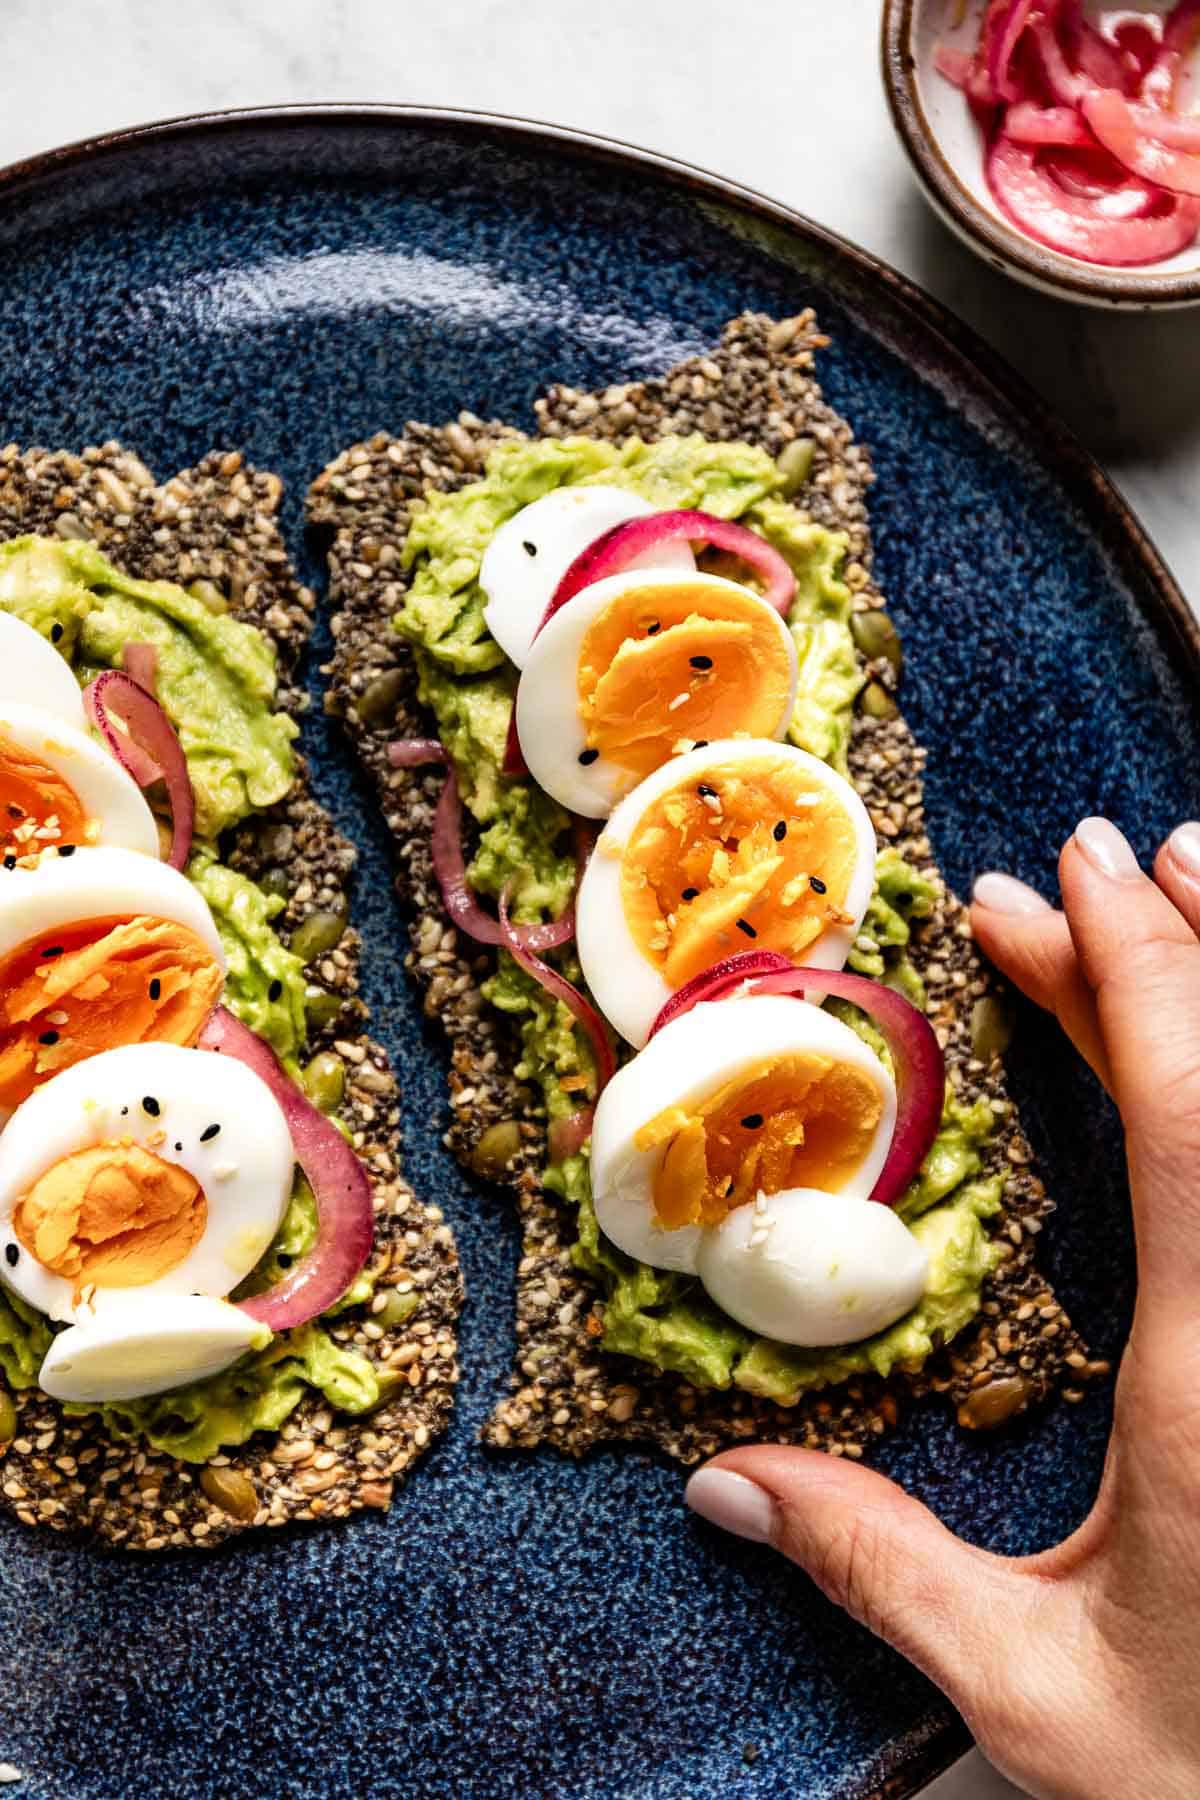 Avocado and egg toast made using homemade crackers with seeds.